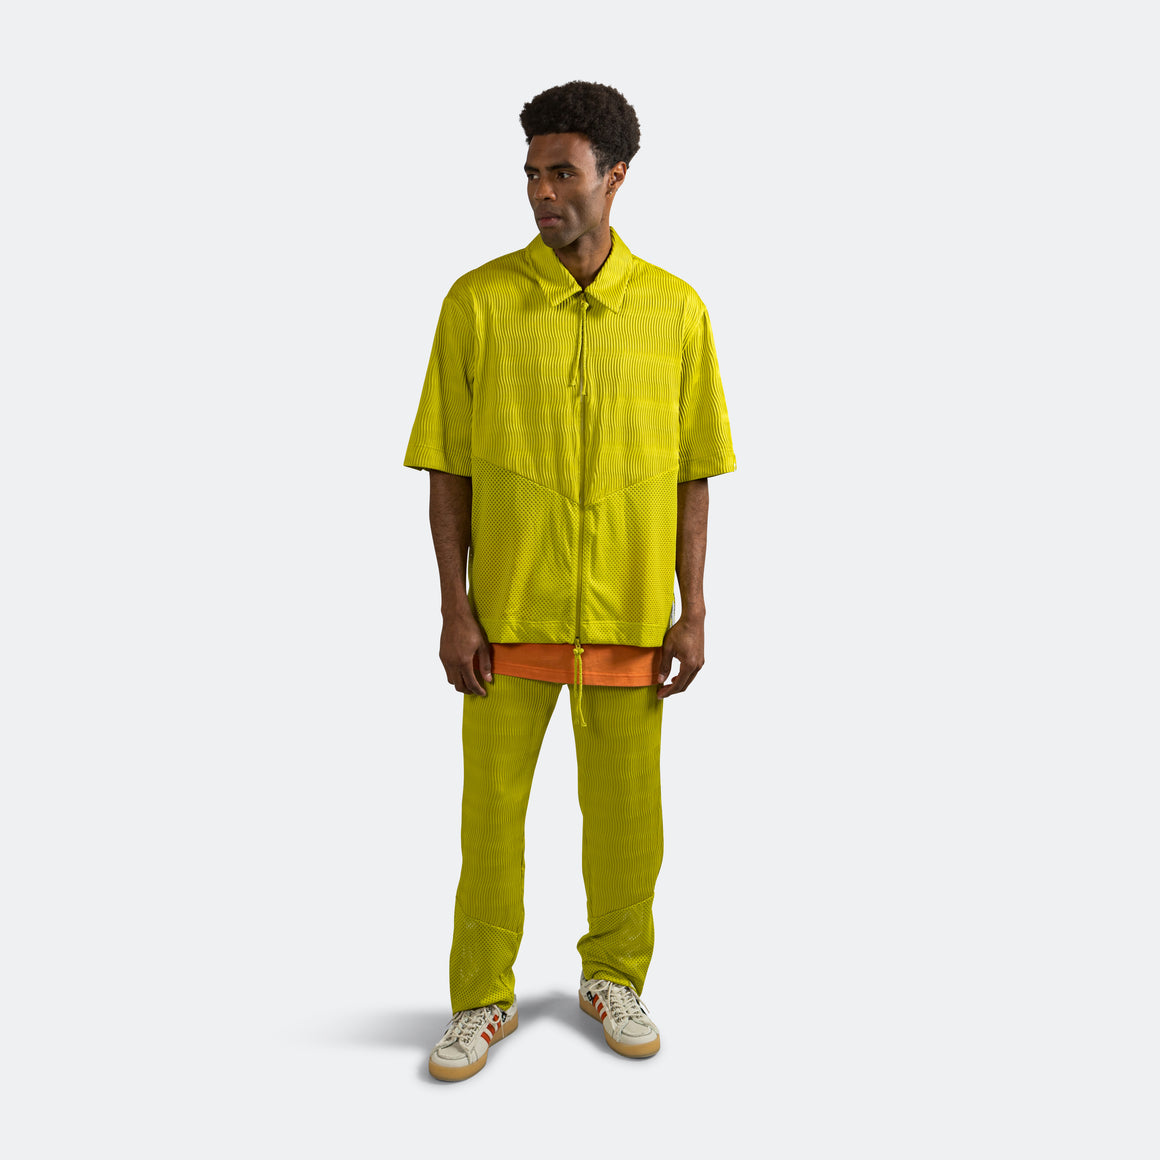 adidas - SFTM Pant - Lime - UP THERE